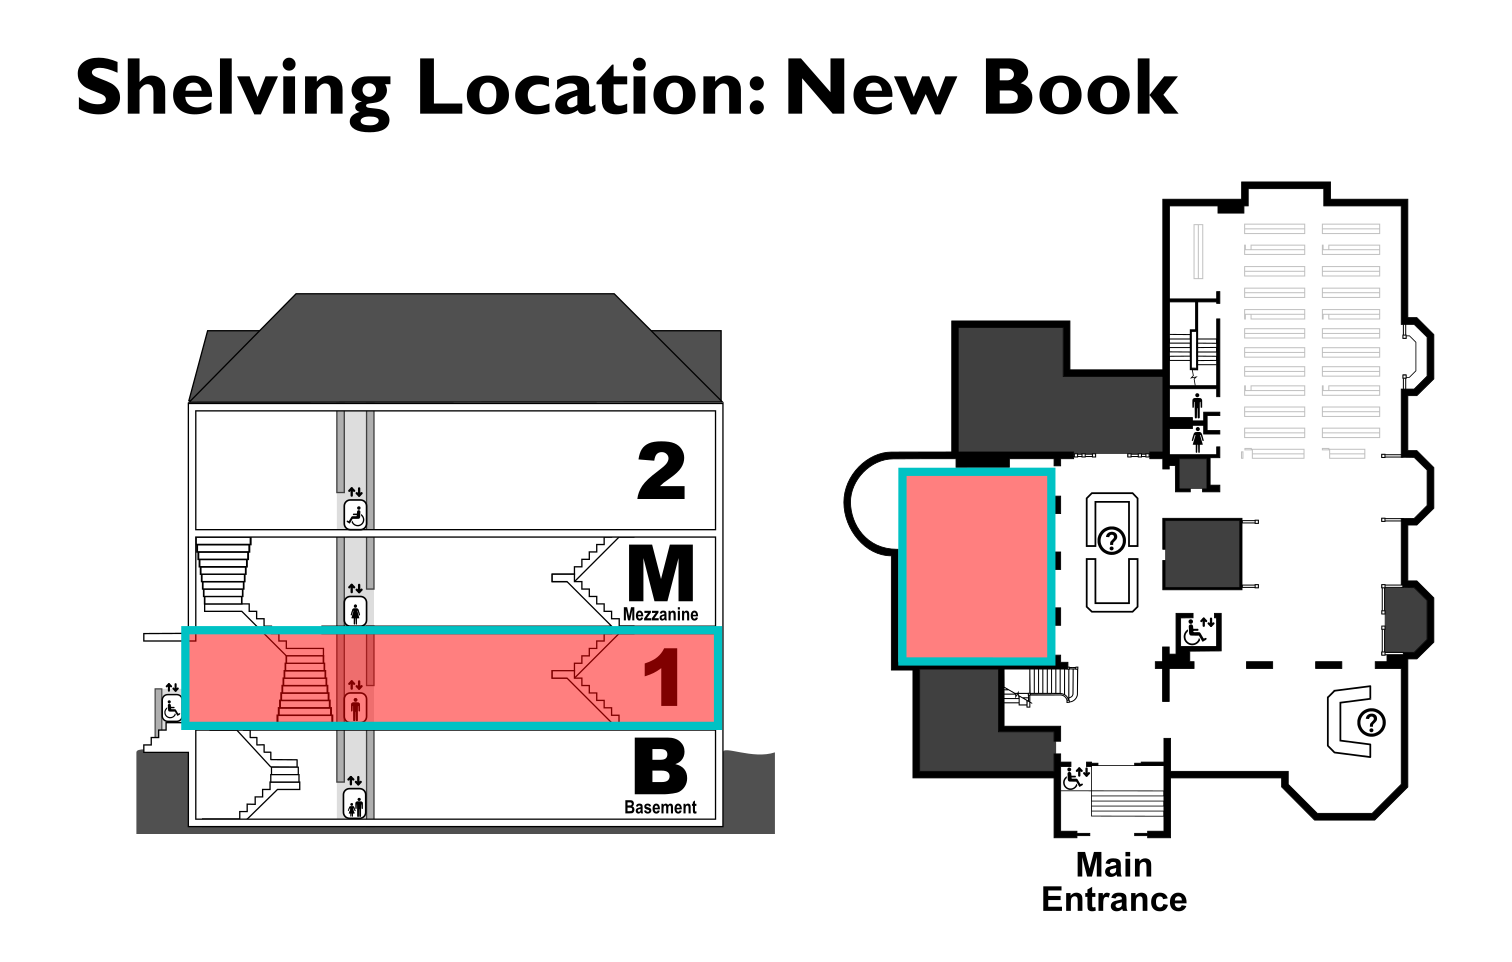 map showing location of the New Book shelving location